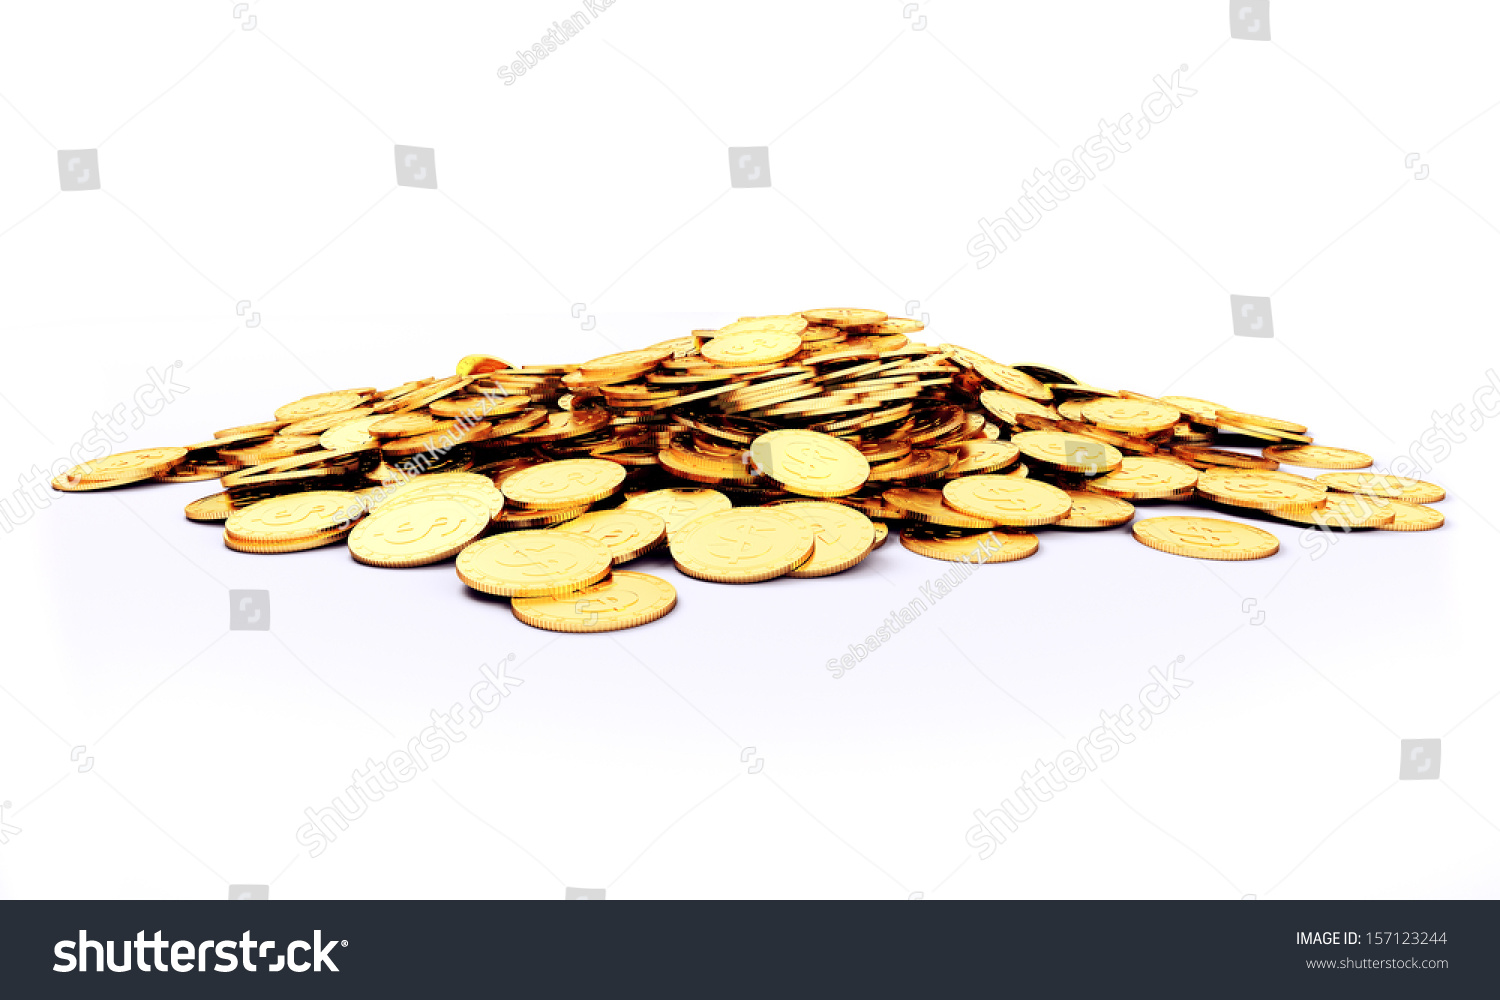 3d rendered illustration of a heap of gold coins #157123244